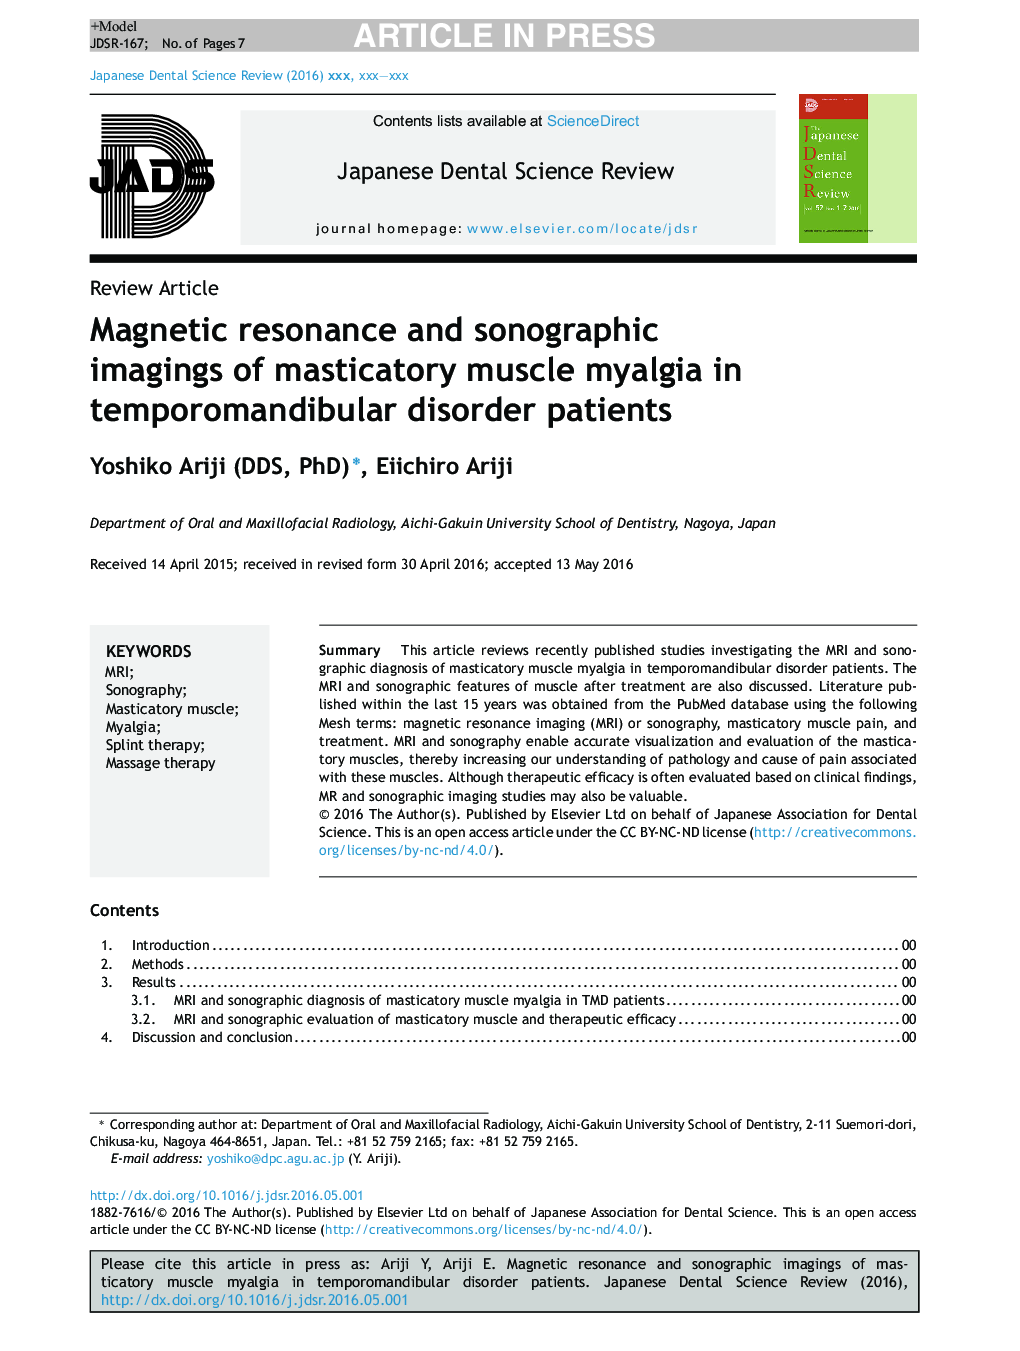 Magnetic resonance and sonographic imagings of masticatory muscle myalgia in temporomandibular disorder patients